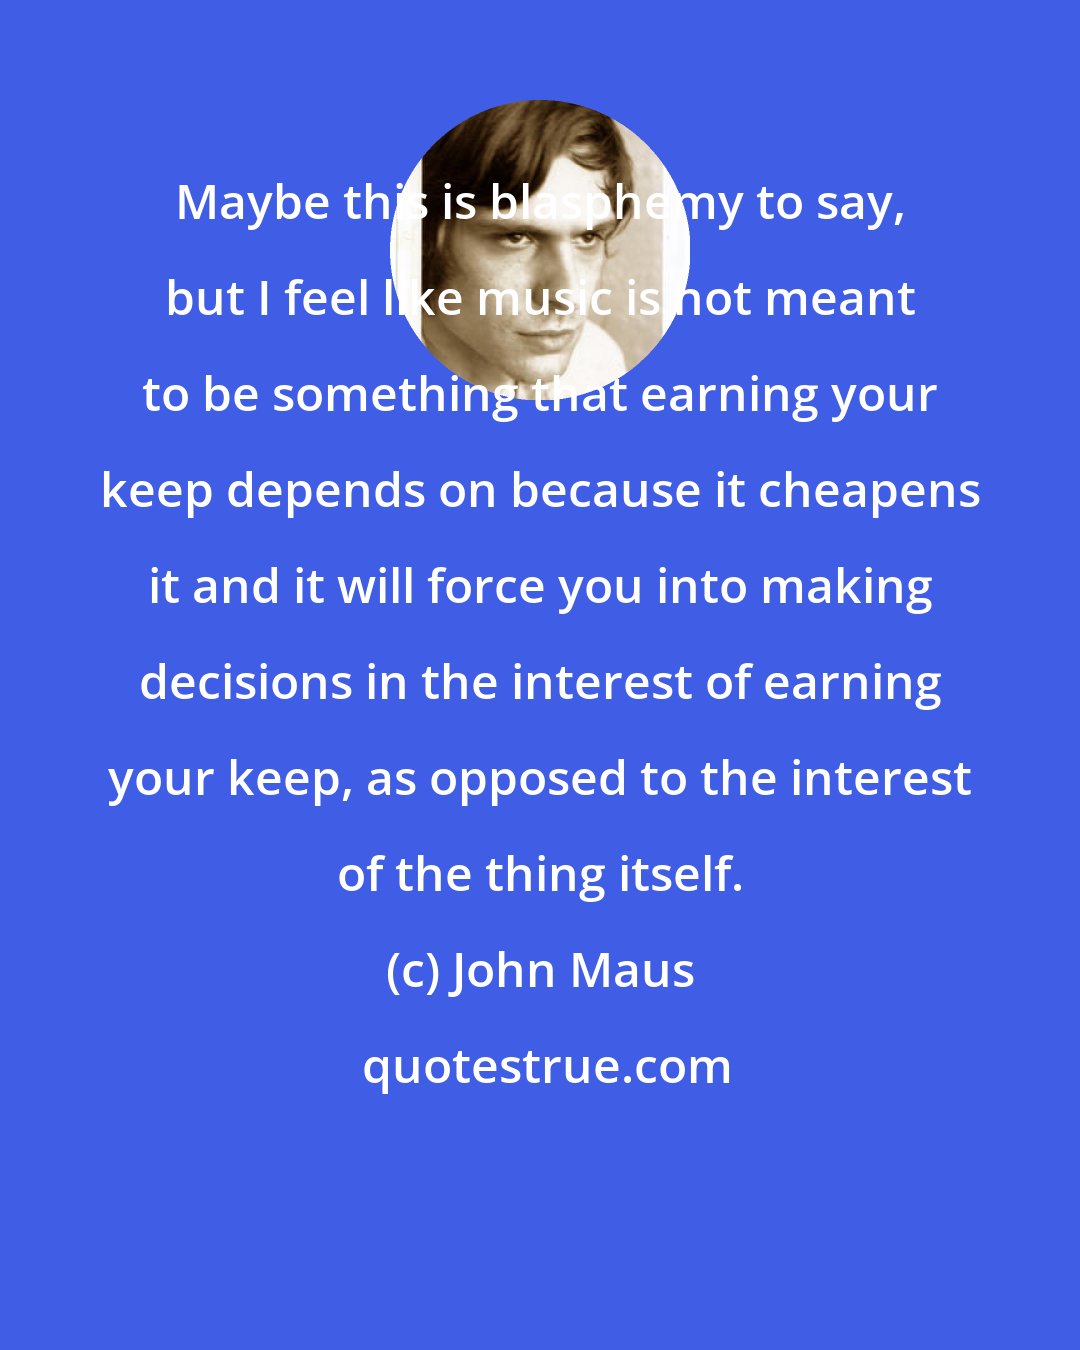 John Maus: Maybe this is blasphemy to say, but I feel like music is not meant to be something that earning your keep depends on because it cheapens it and it will force you into making decisions in the interest of earning your keep, as opposed to the interest of the thing itself.